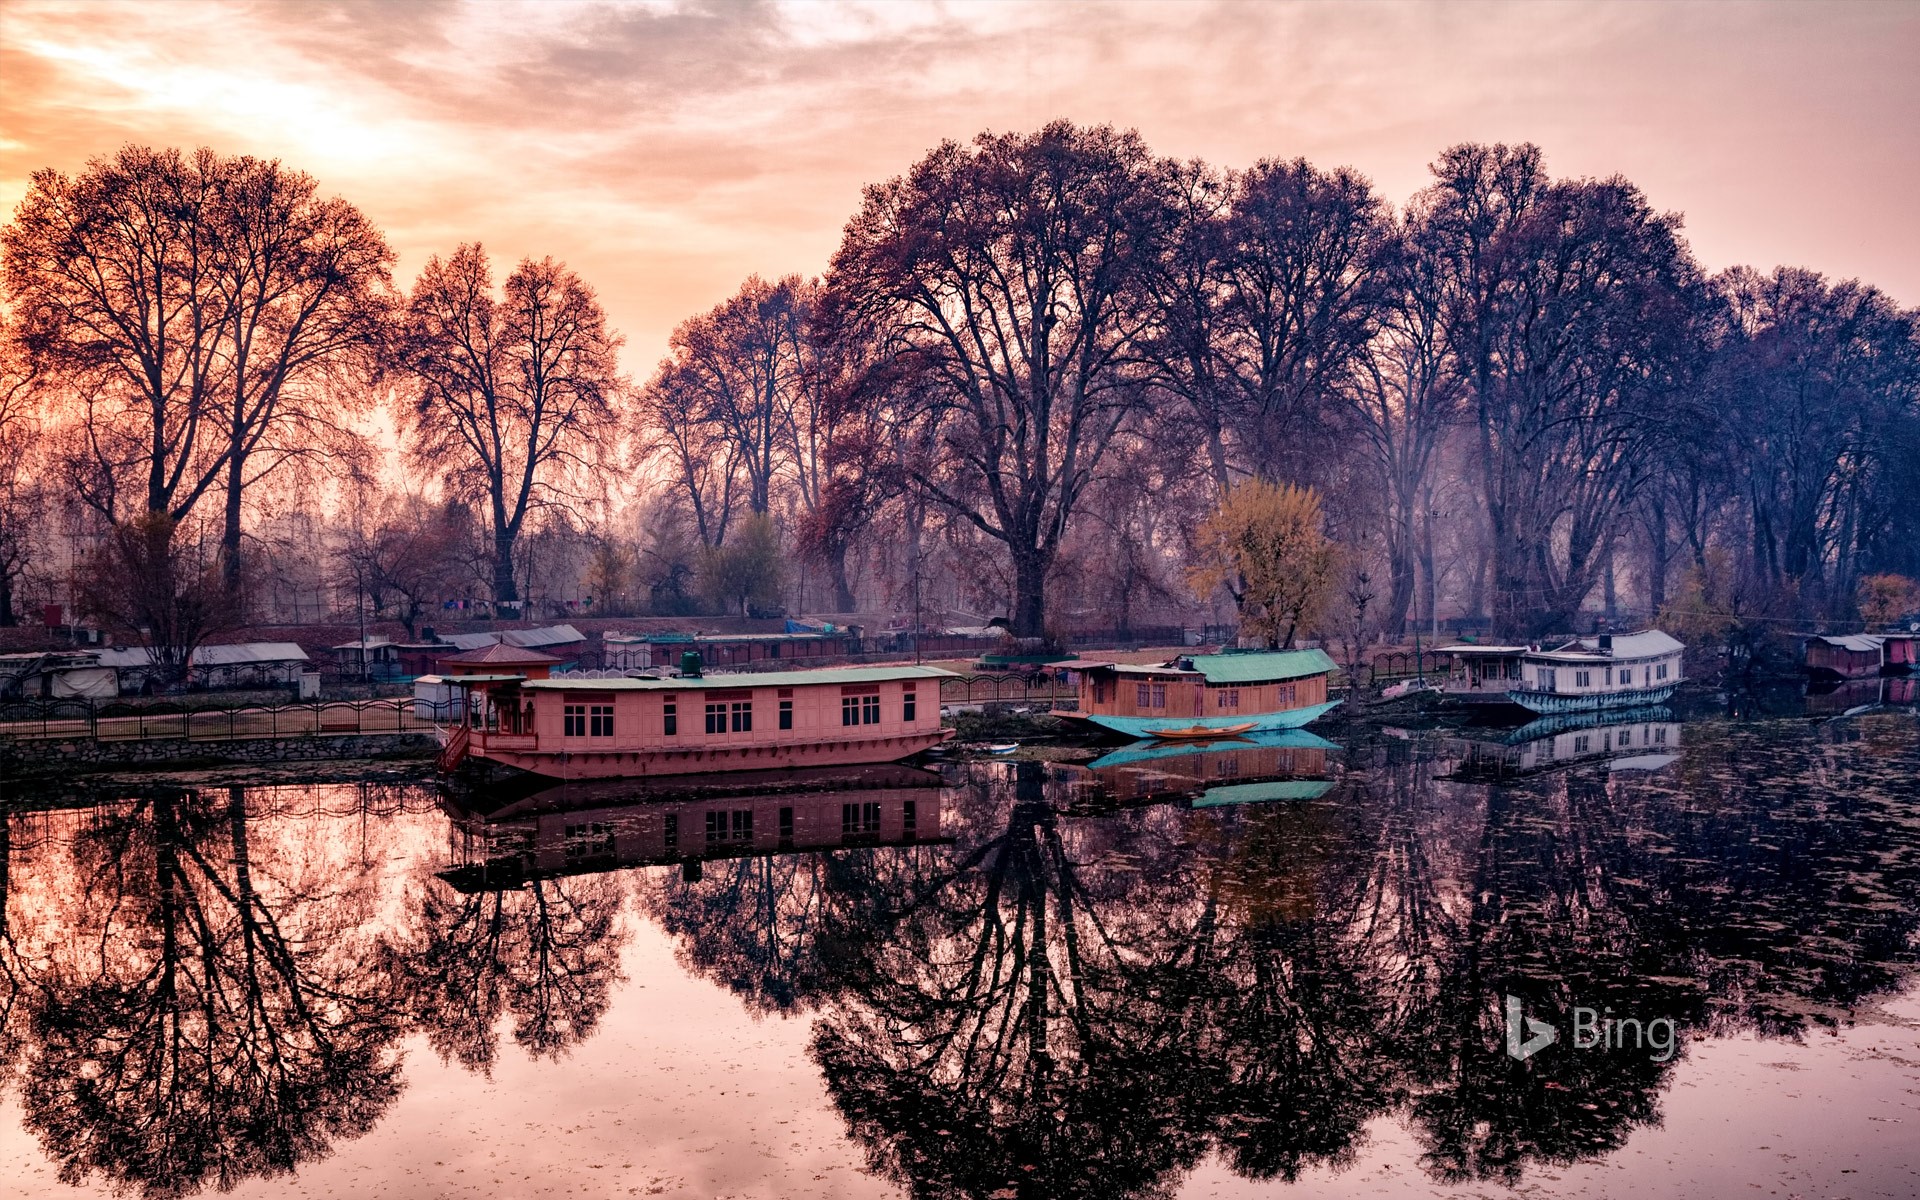 Houseboats on bank of the Jhelum River, India